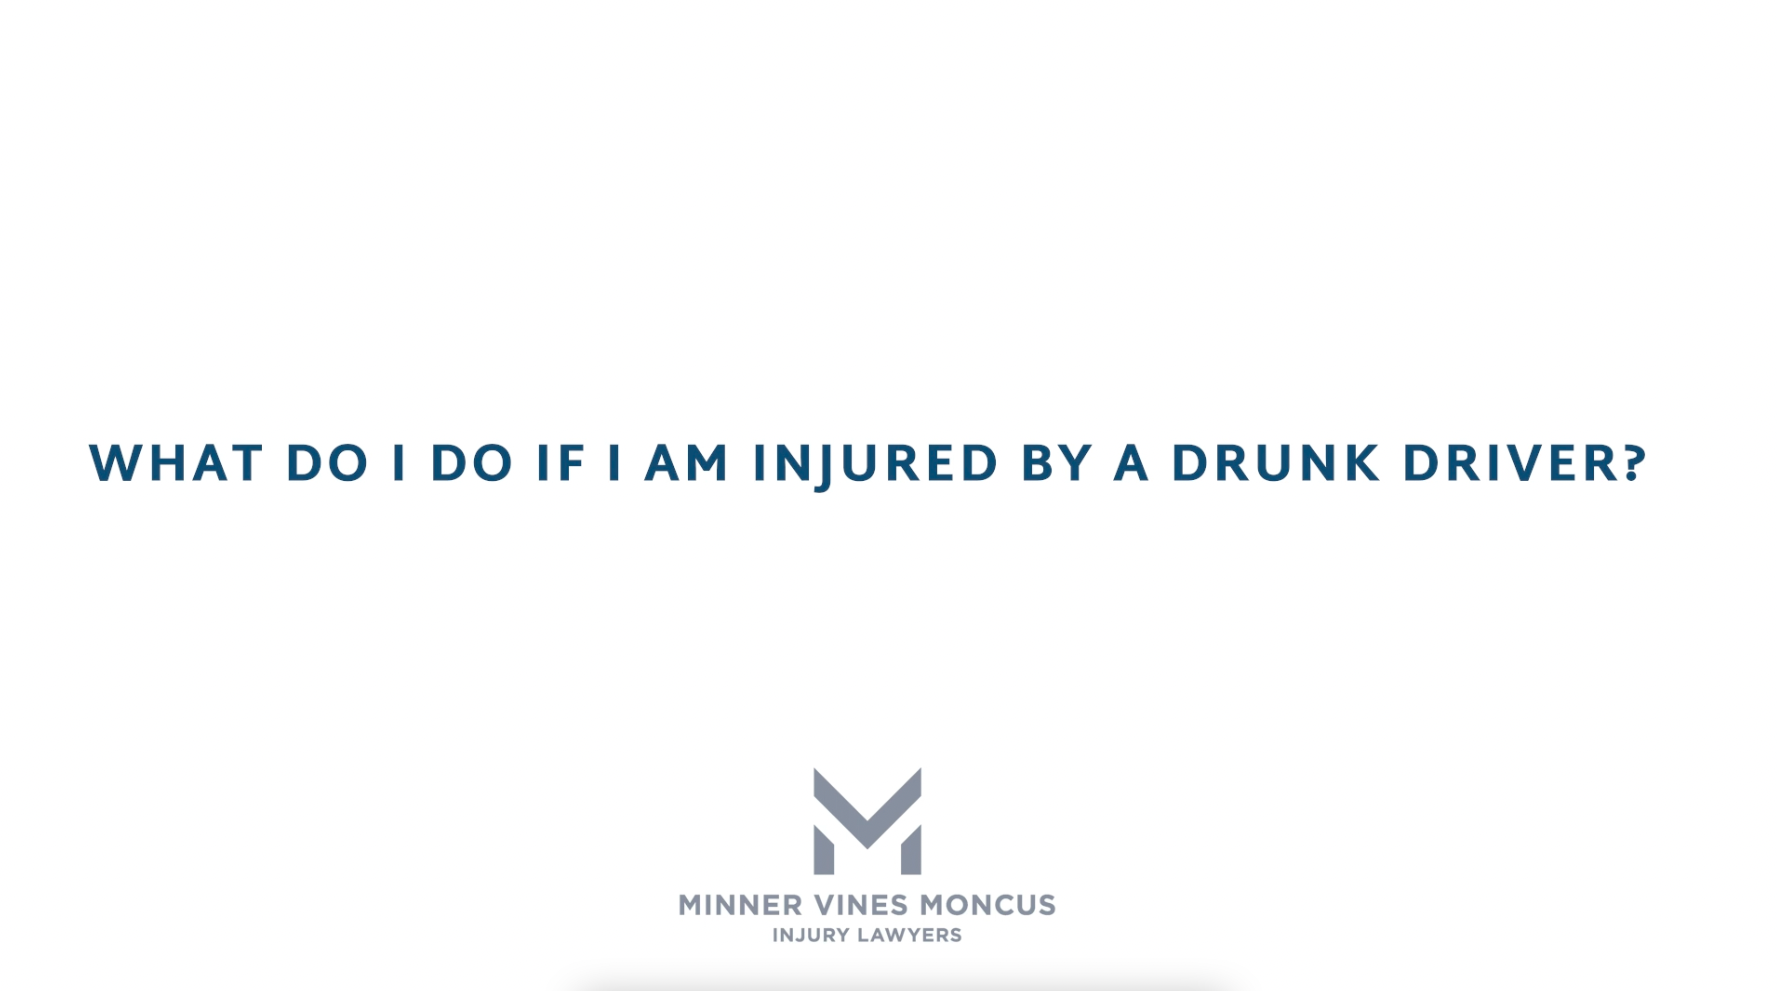 What do I do if I am injured by a drunk driver?